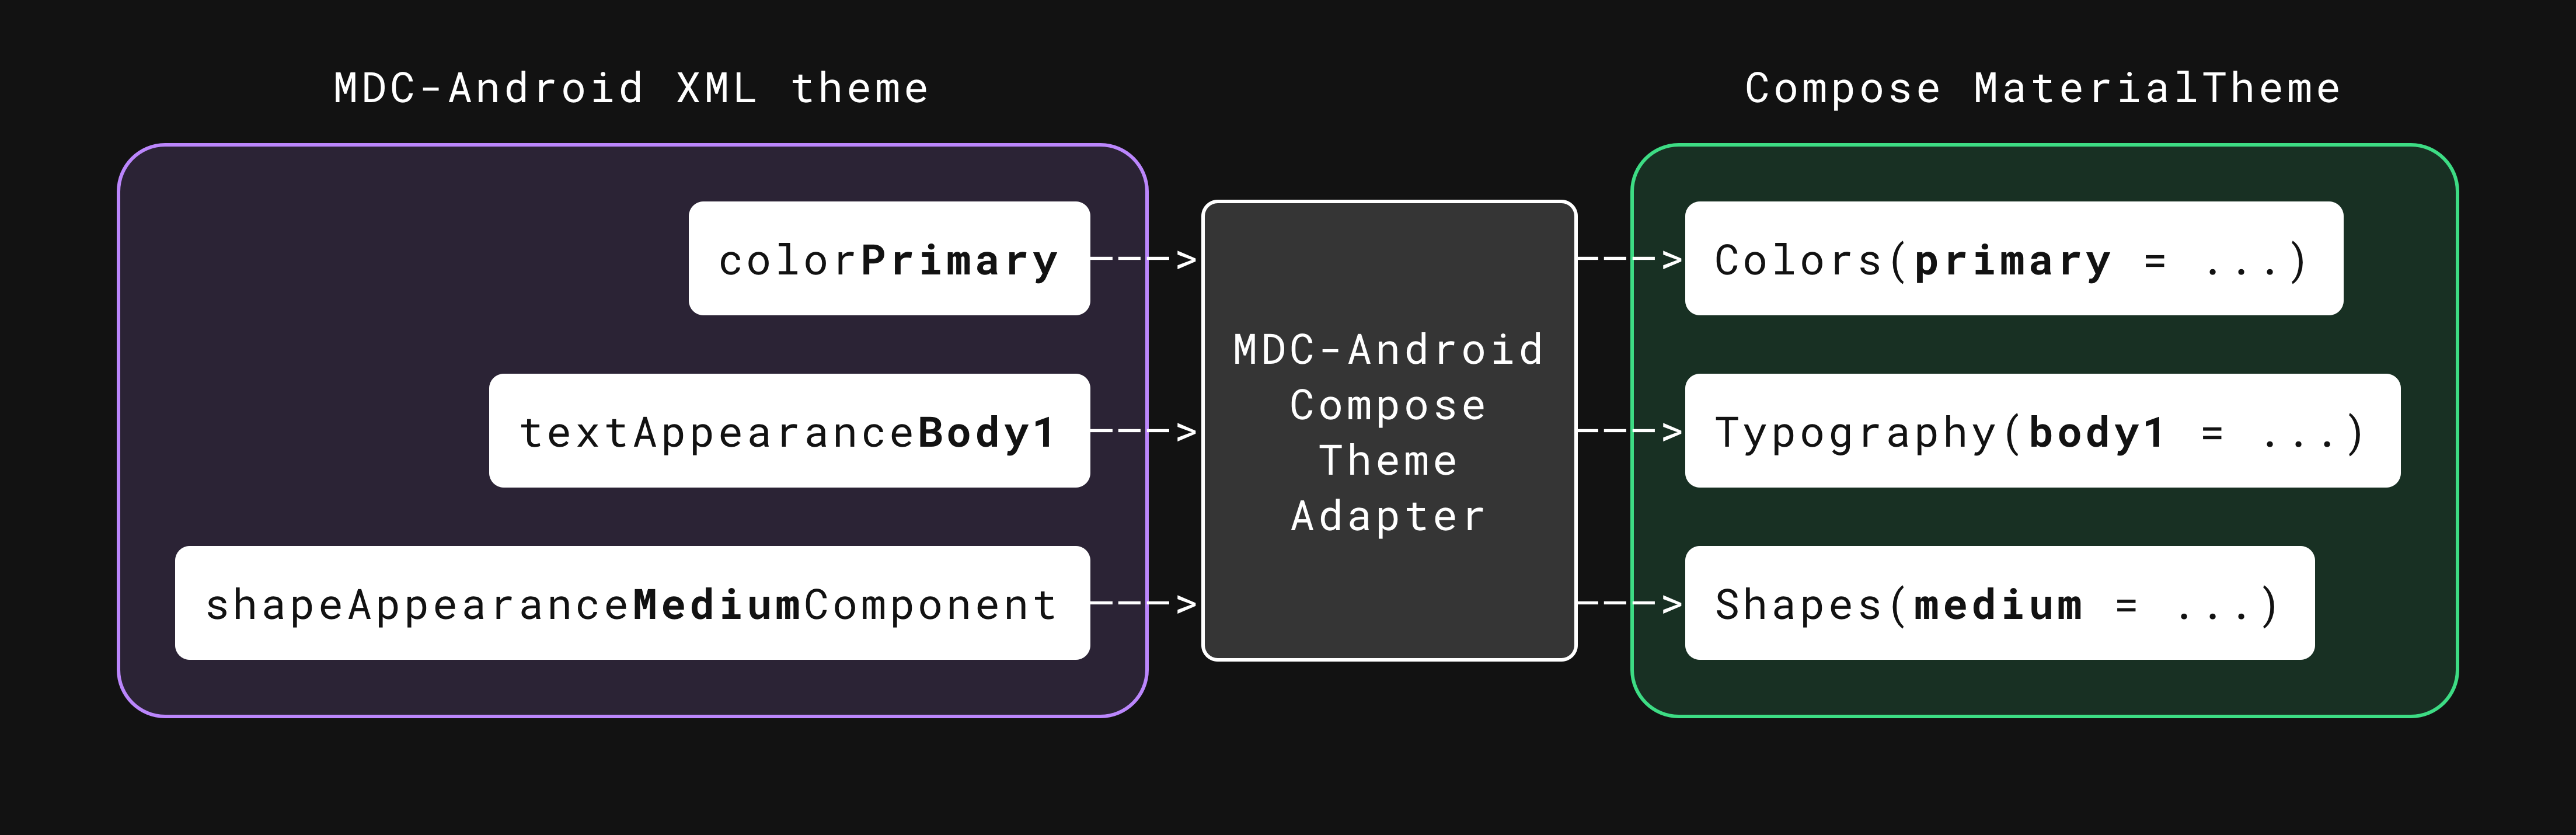 Material components. Compose material Theme. Compose Android. Jetpack compose vs XML. Android material components.